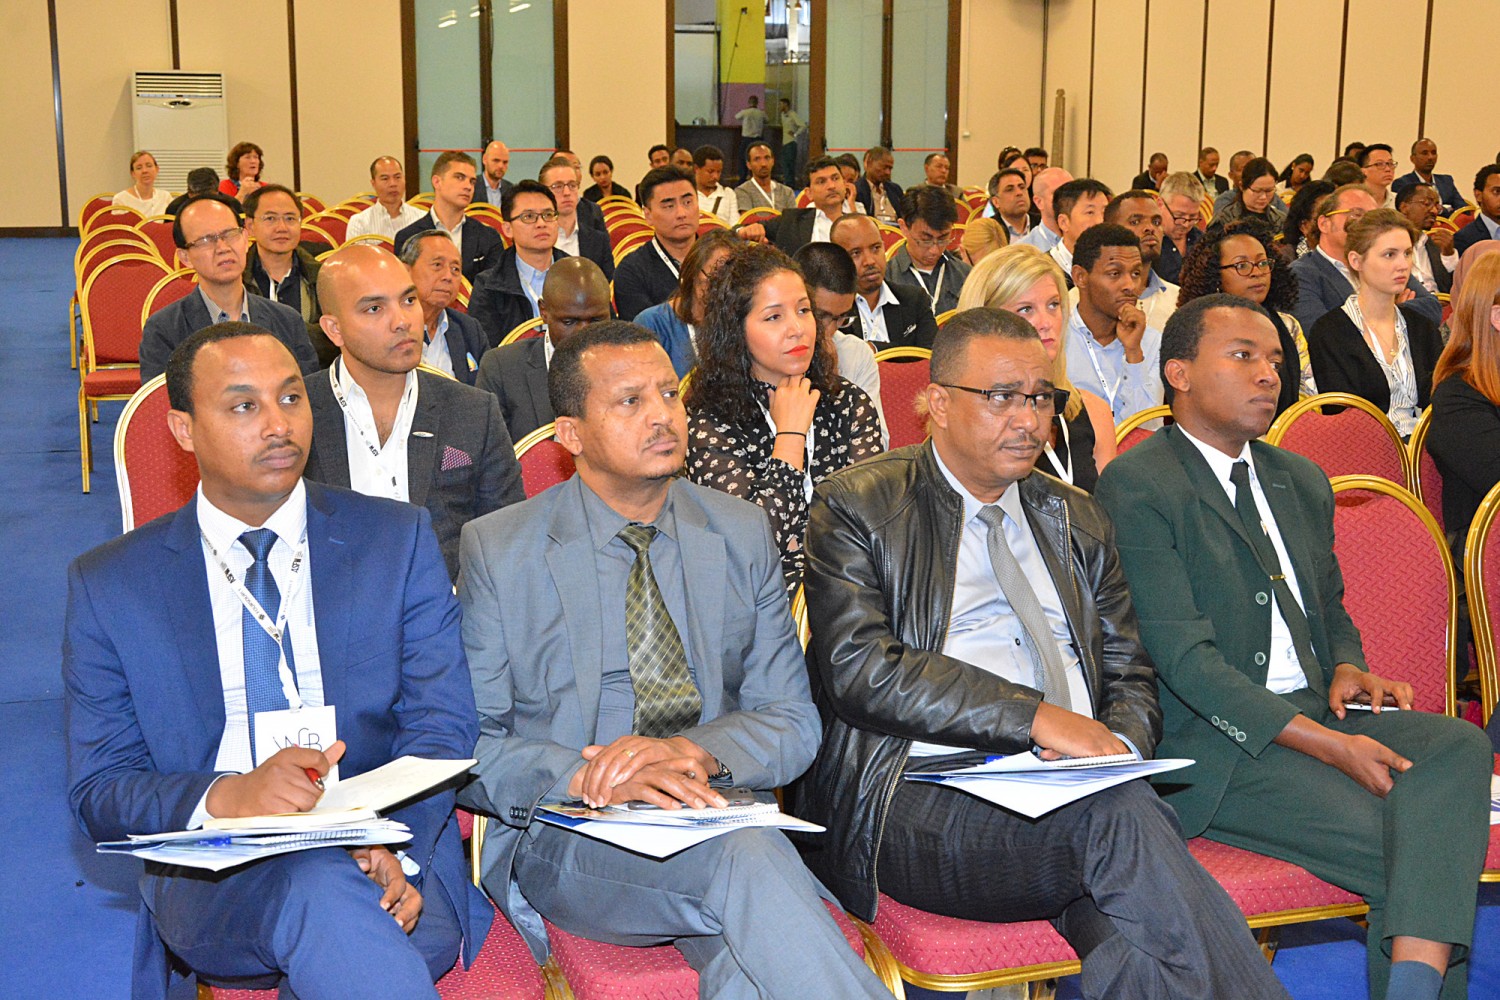 ASFW会议占用的话题investment by a panel presented by the government of Ethiopia. © ASFW